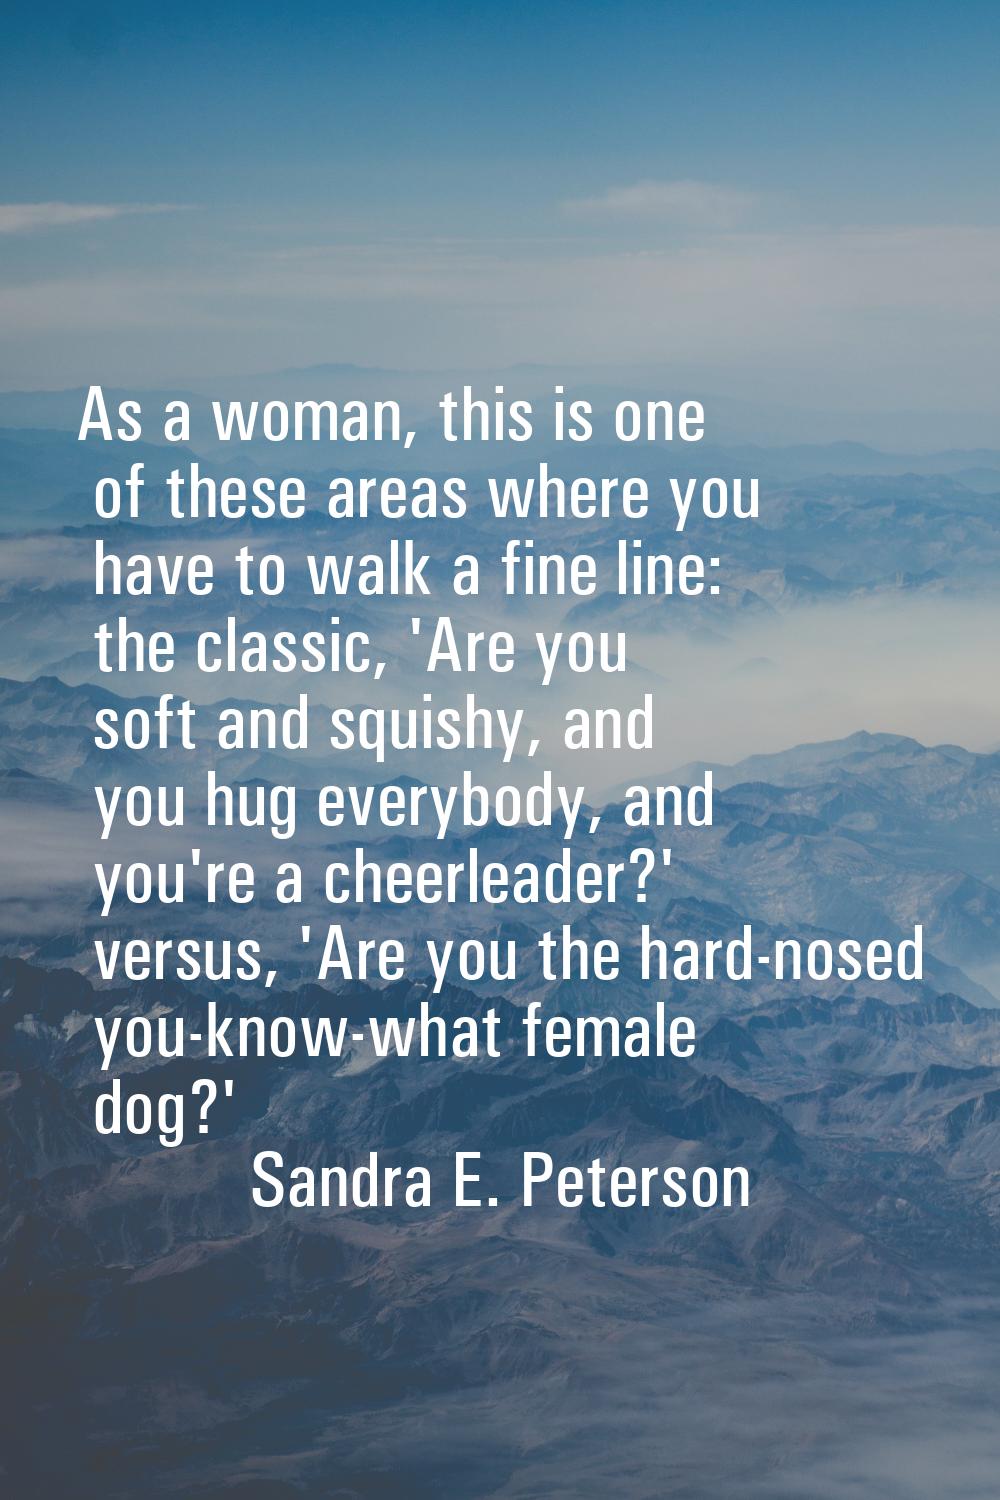 As a woman, this is one of these areas where you have to walk a fine line: the classic, 'Are you so